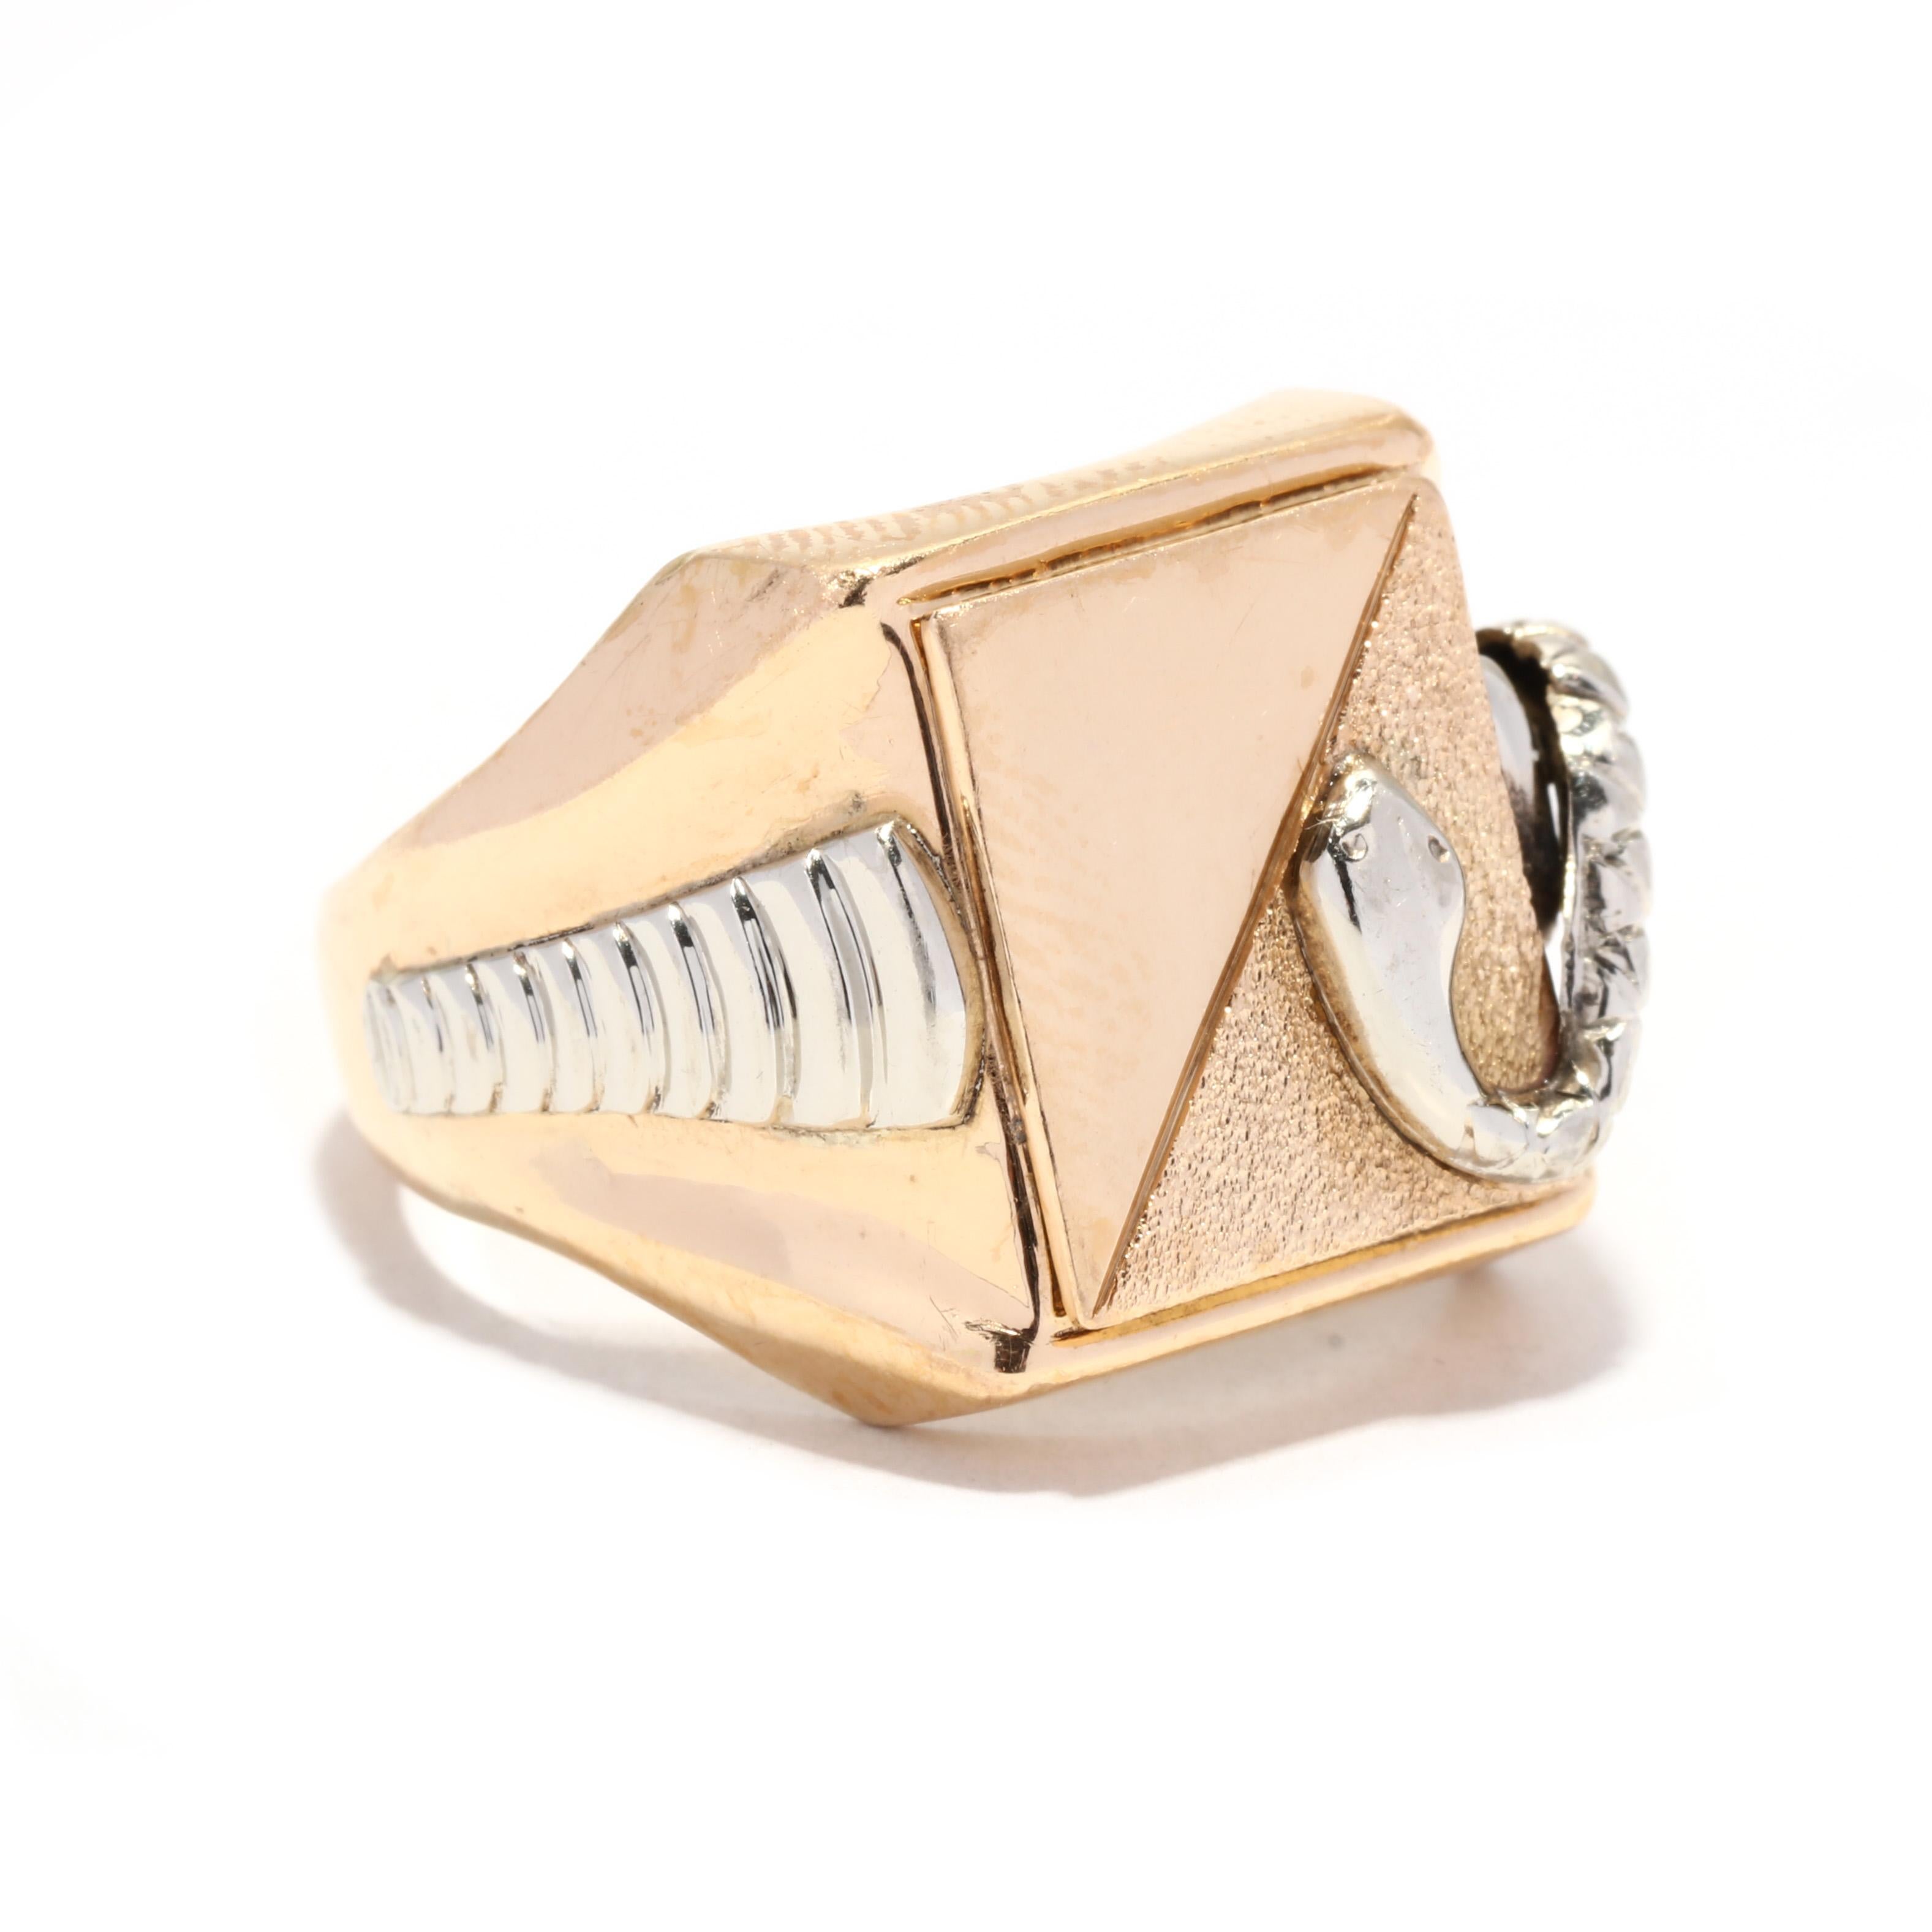 A vintage 18 karat bi color gold rectangular snake signet ring. This large gent's signer ring features a polished and textured finish rectangular face with a white gold snake motif coiled over the edge on to the tapered band and with white gold